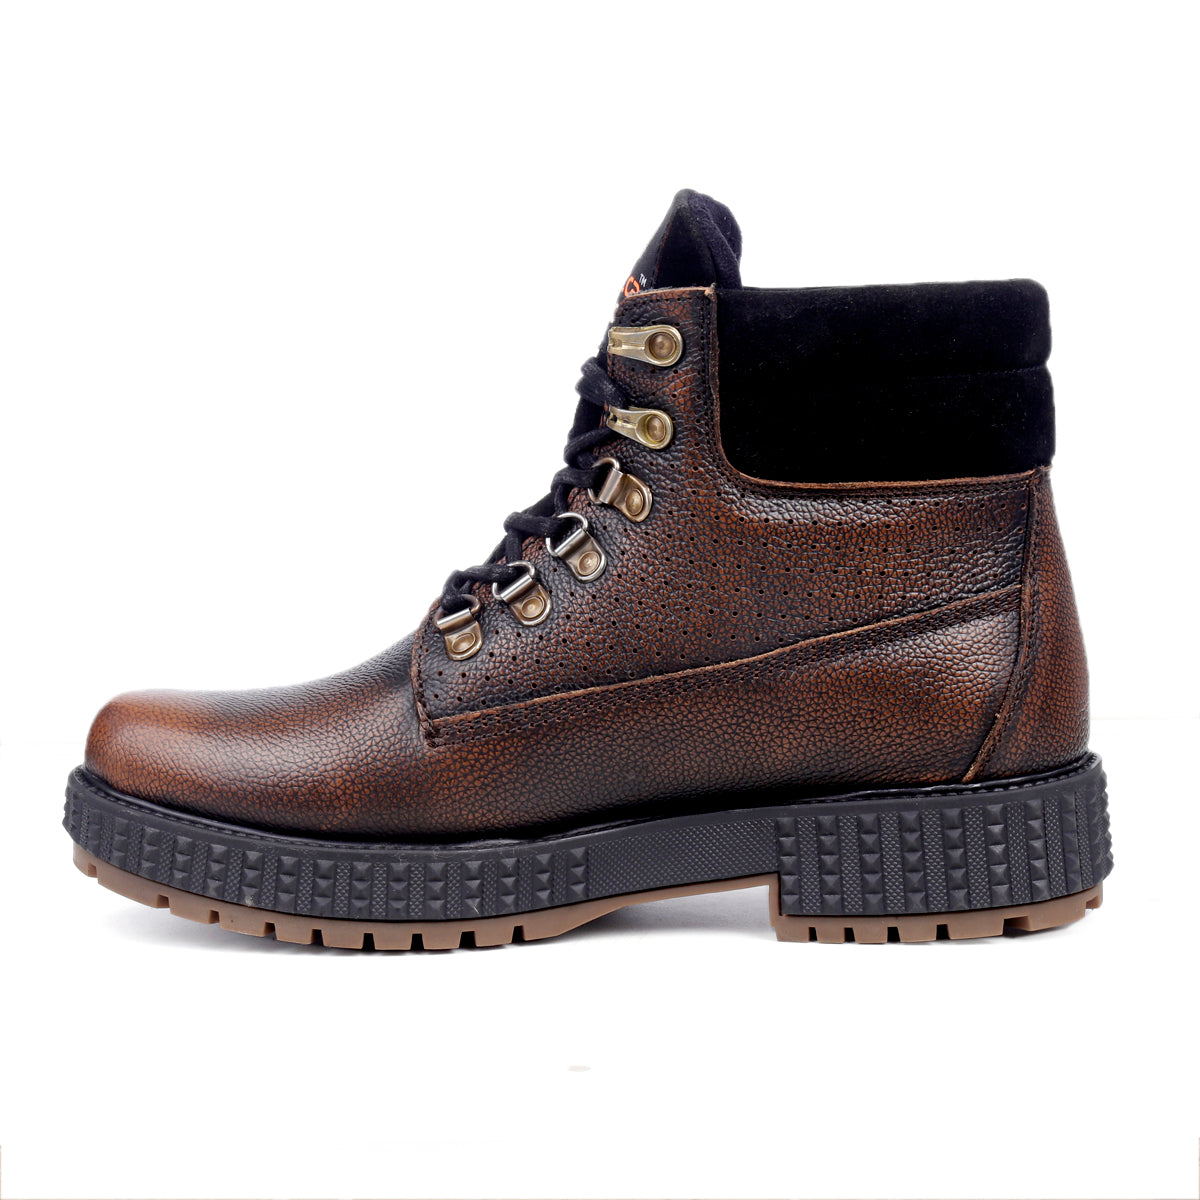 water resistant boots, leather boots for men, trekking boots, mens boots